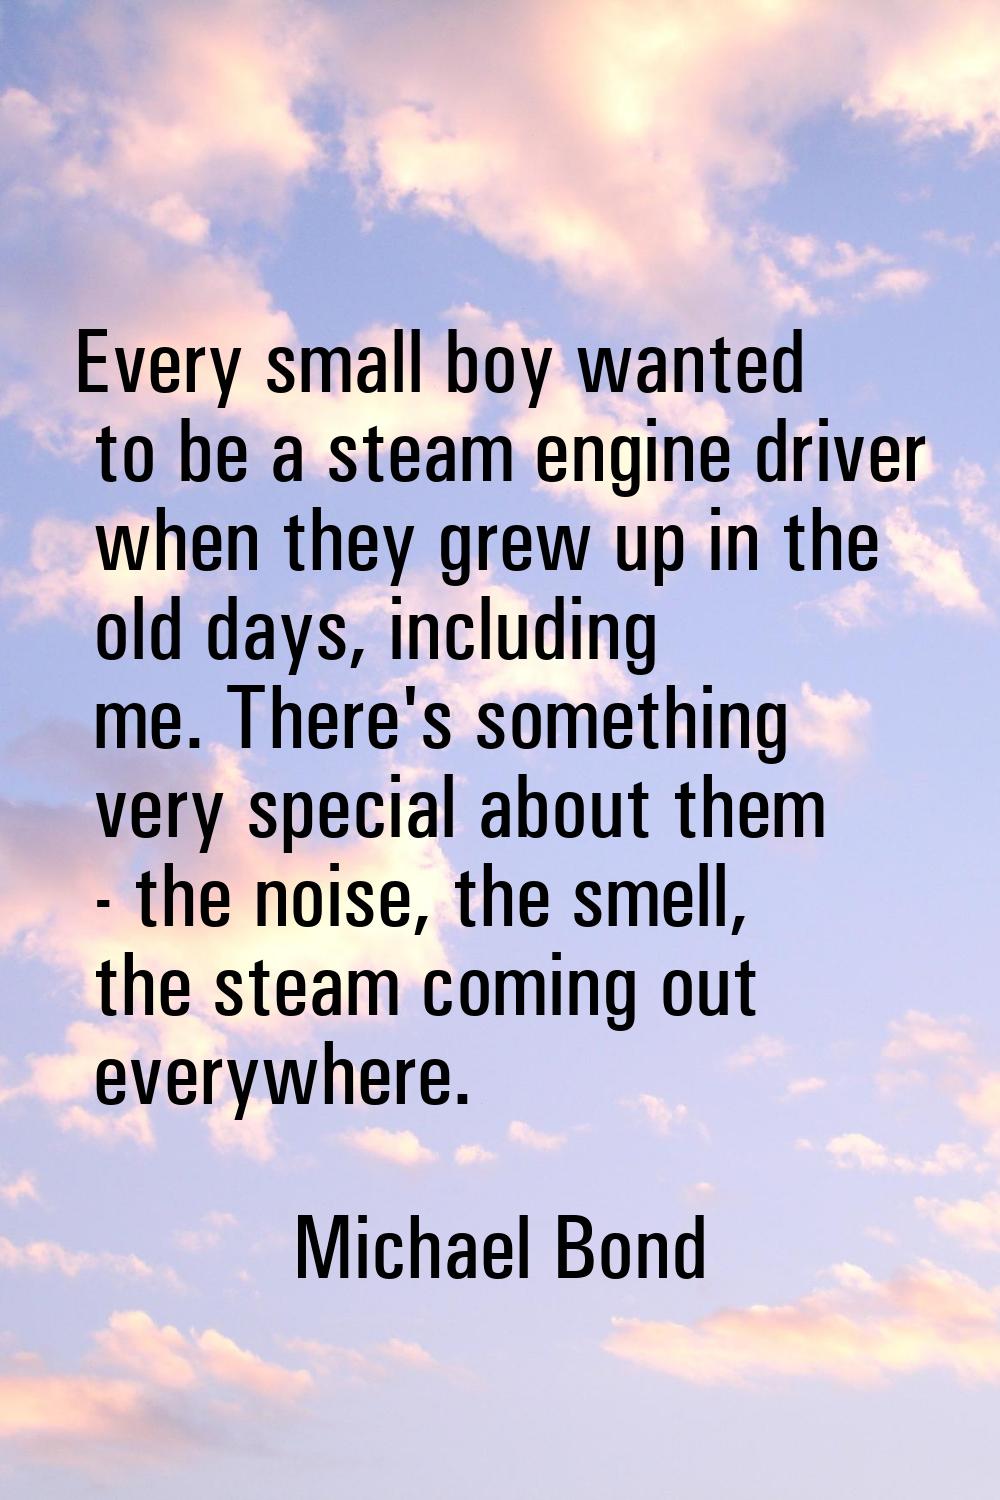 Every small boy wanted to be a steam engine driver when they grew up in the old days, including me.